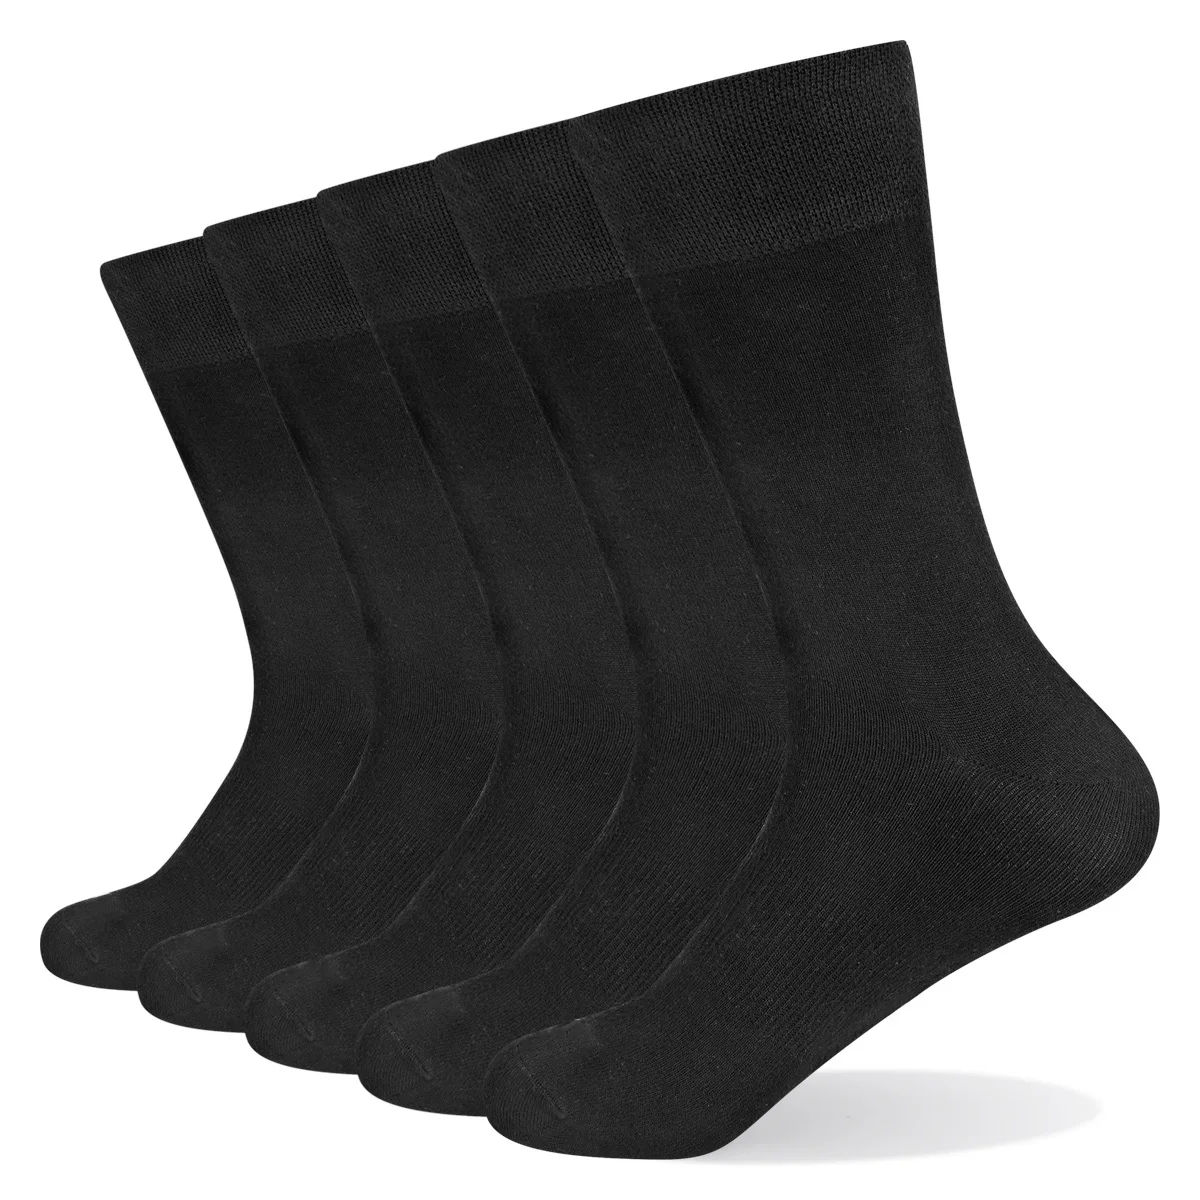 YUEDGE 5 Pairs Men's Bamboo Breathable Everyday Thin Socks Comfortable Formal Business Dress Socks